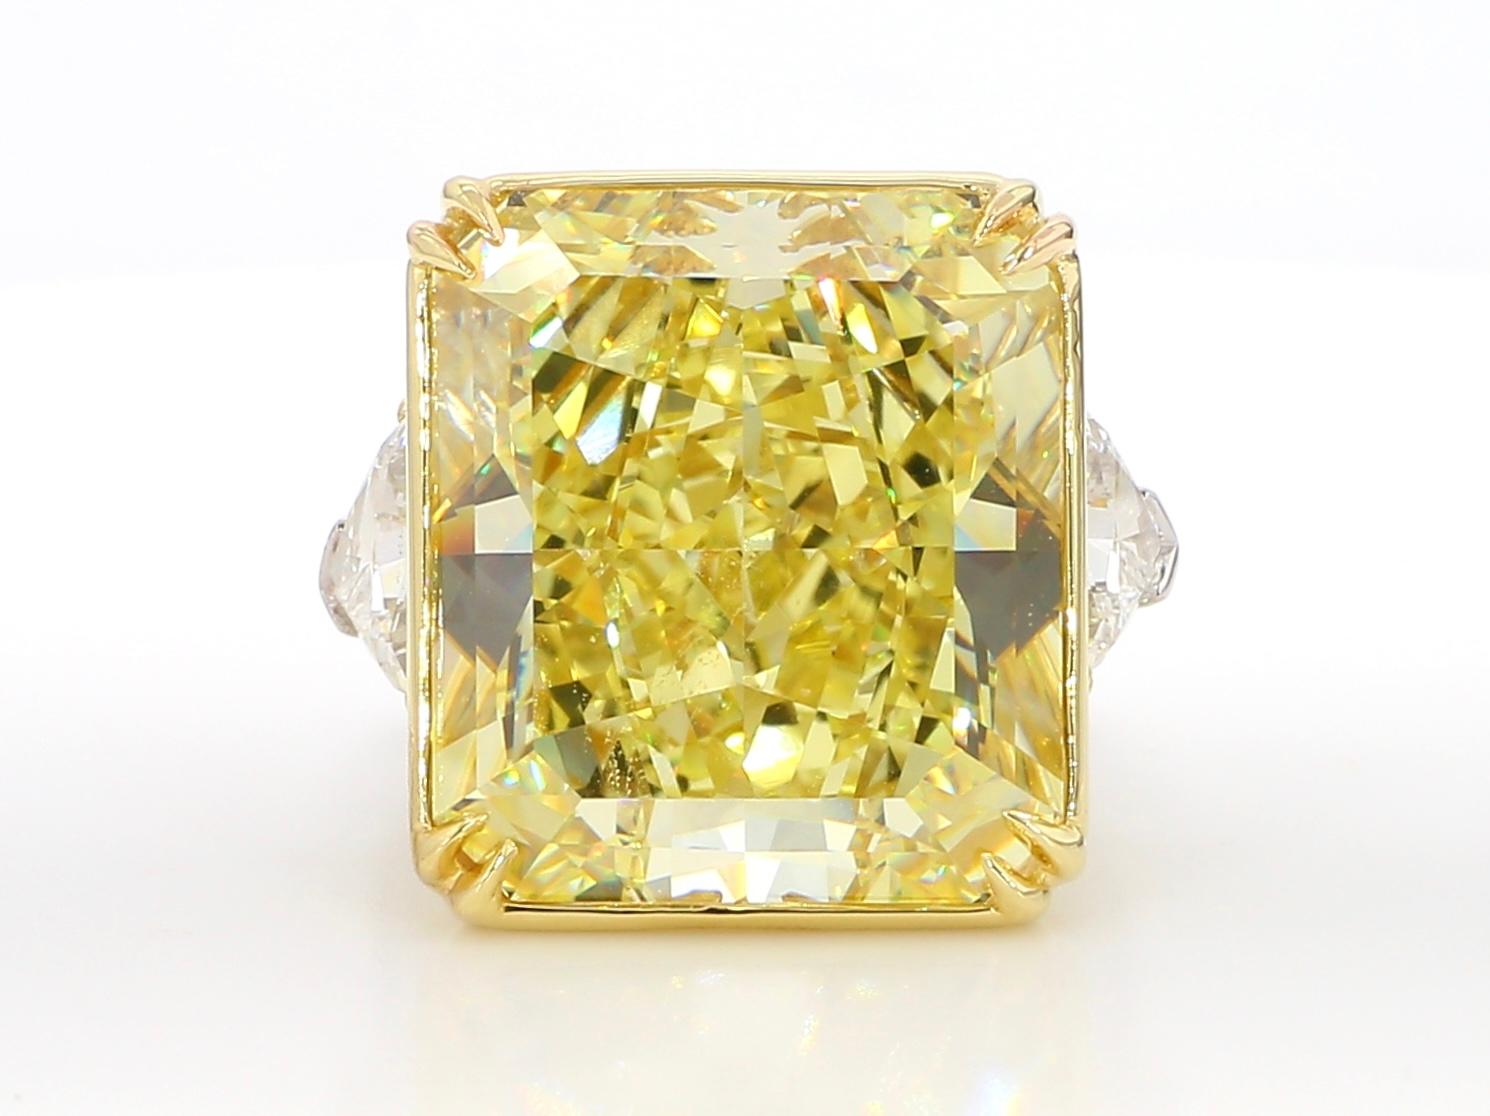 30 Carat Fancy Intense Yellow Diamond Engagement Ring, In Platinum GIA Certified For Sale 1